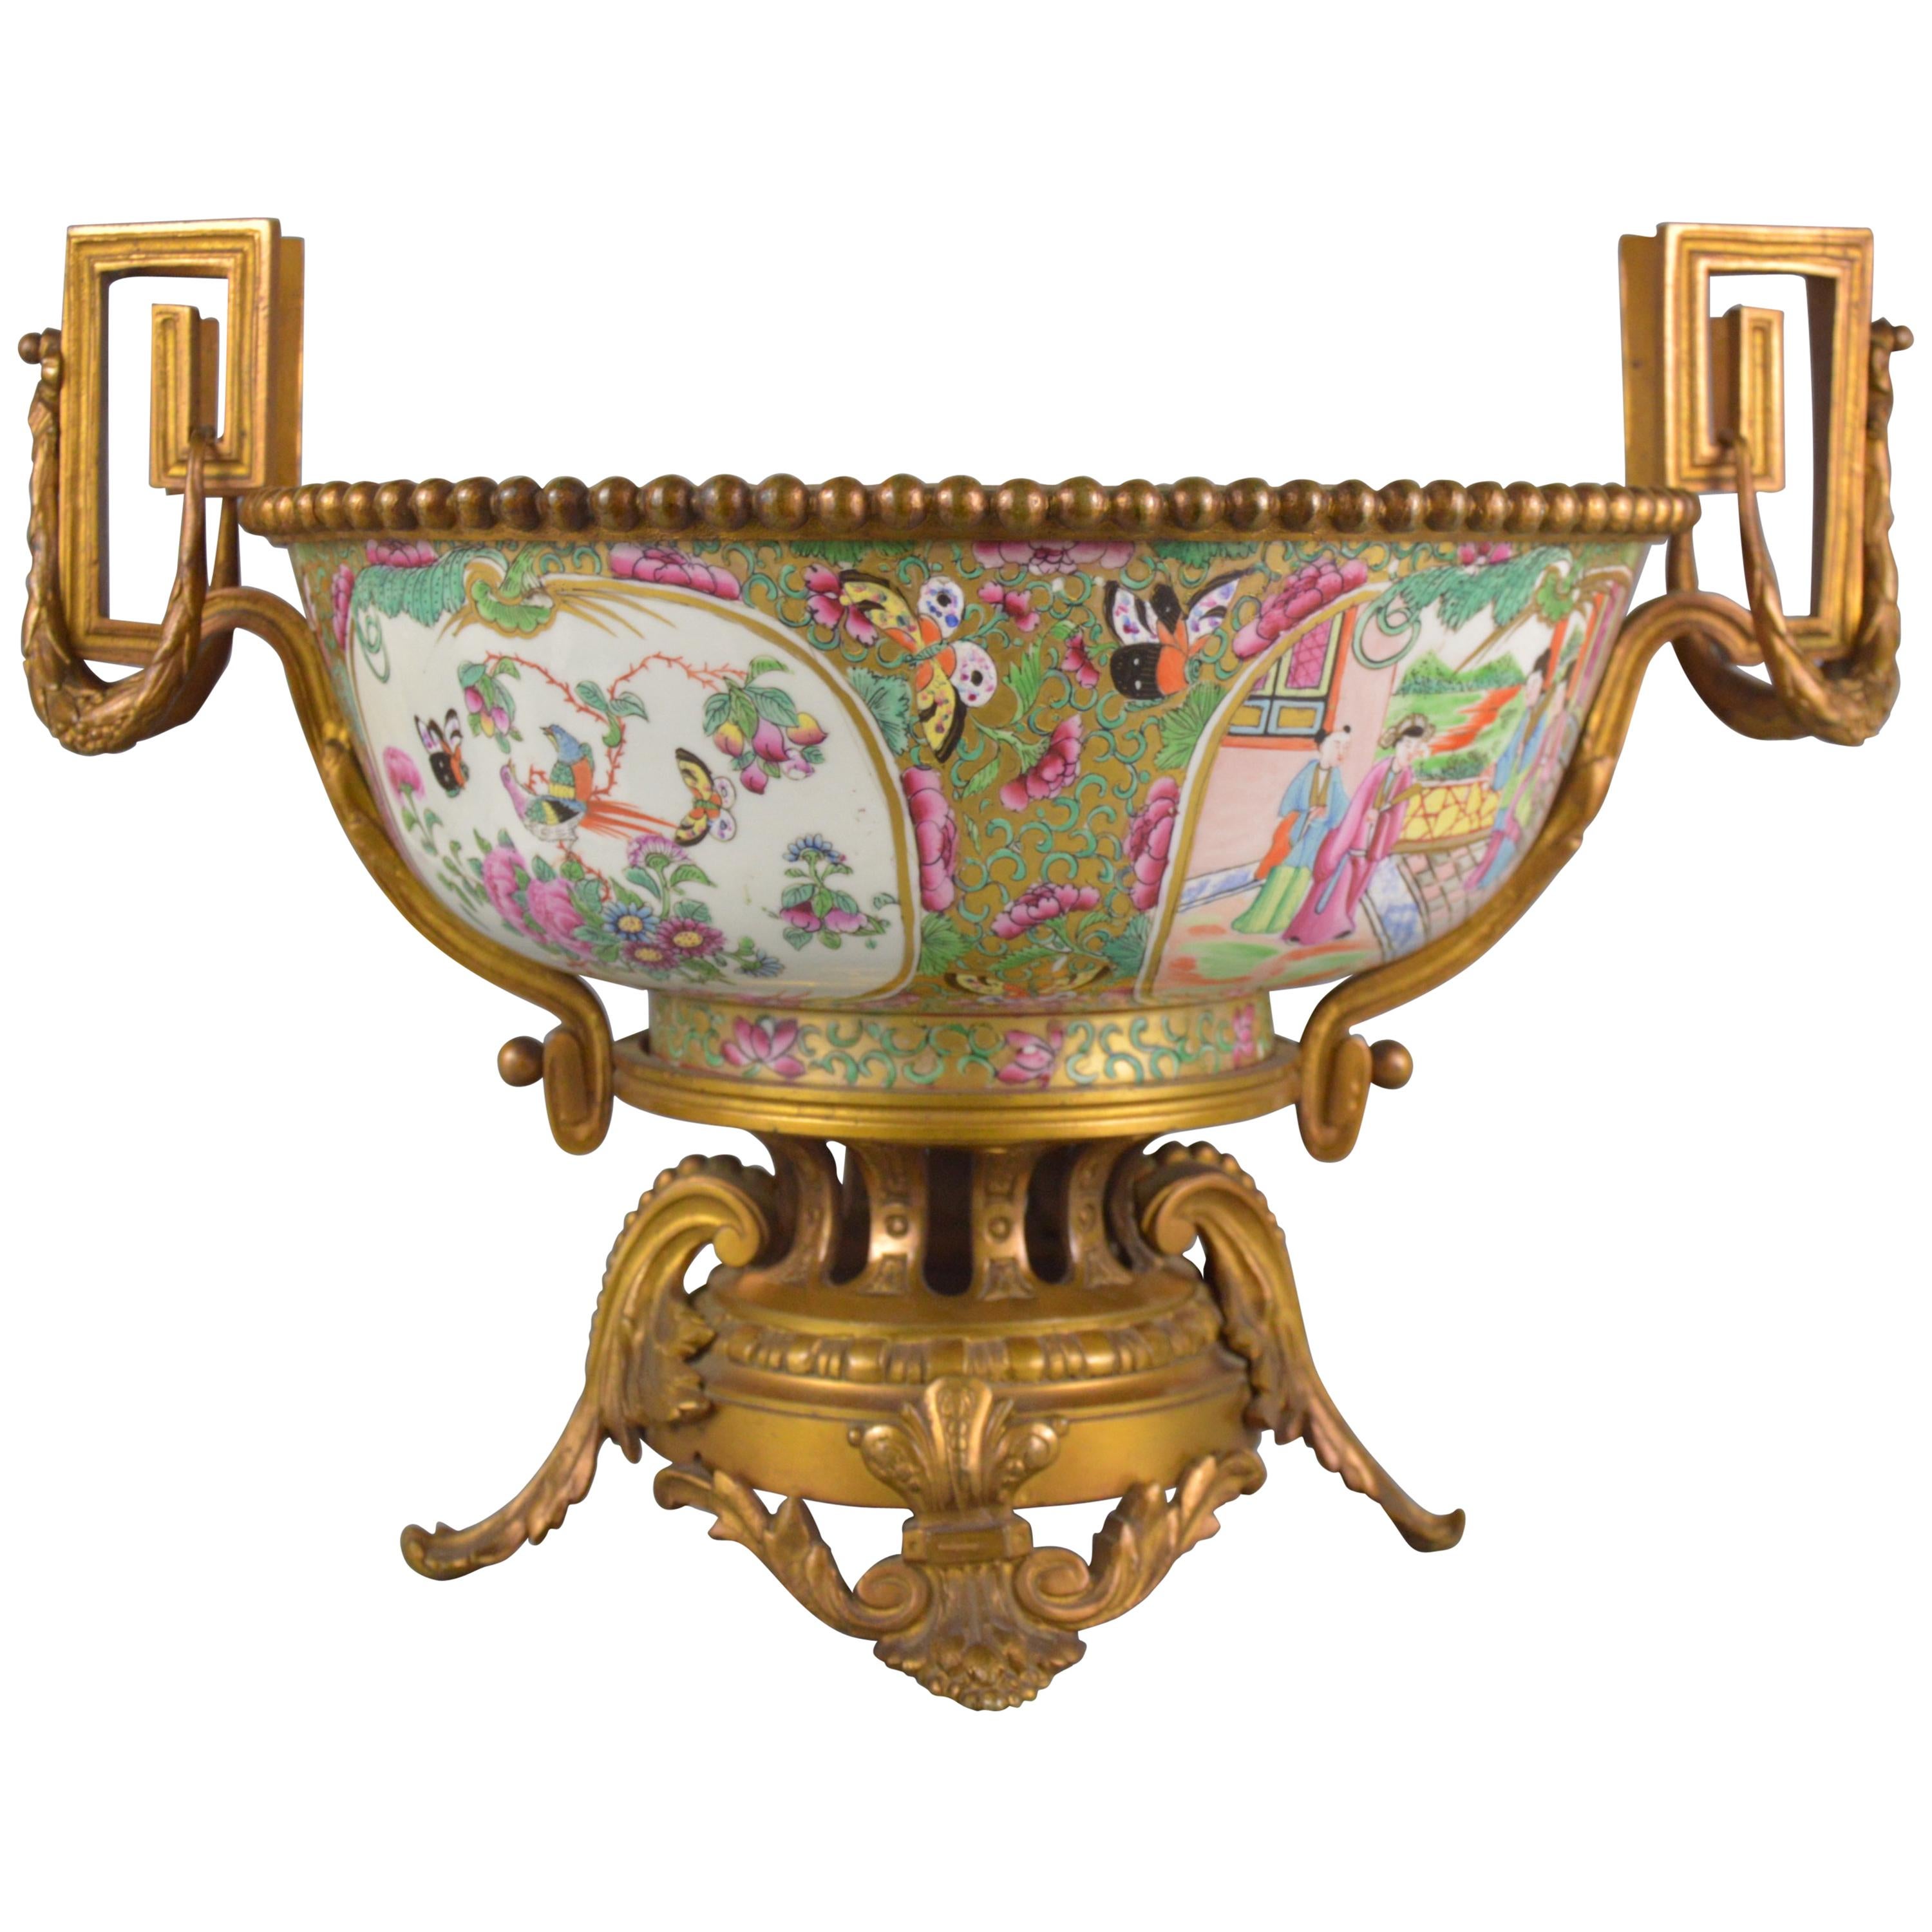 19th Century Chinese Gilt Bronze-Mounted Canton Porcelain Bowl